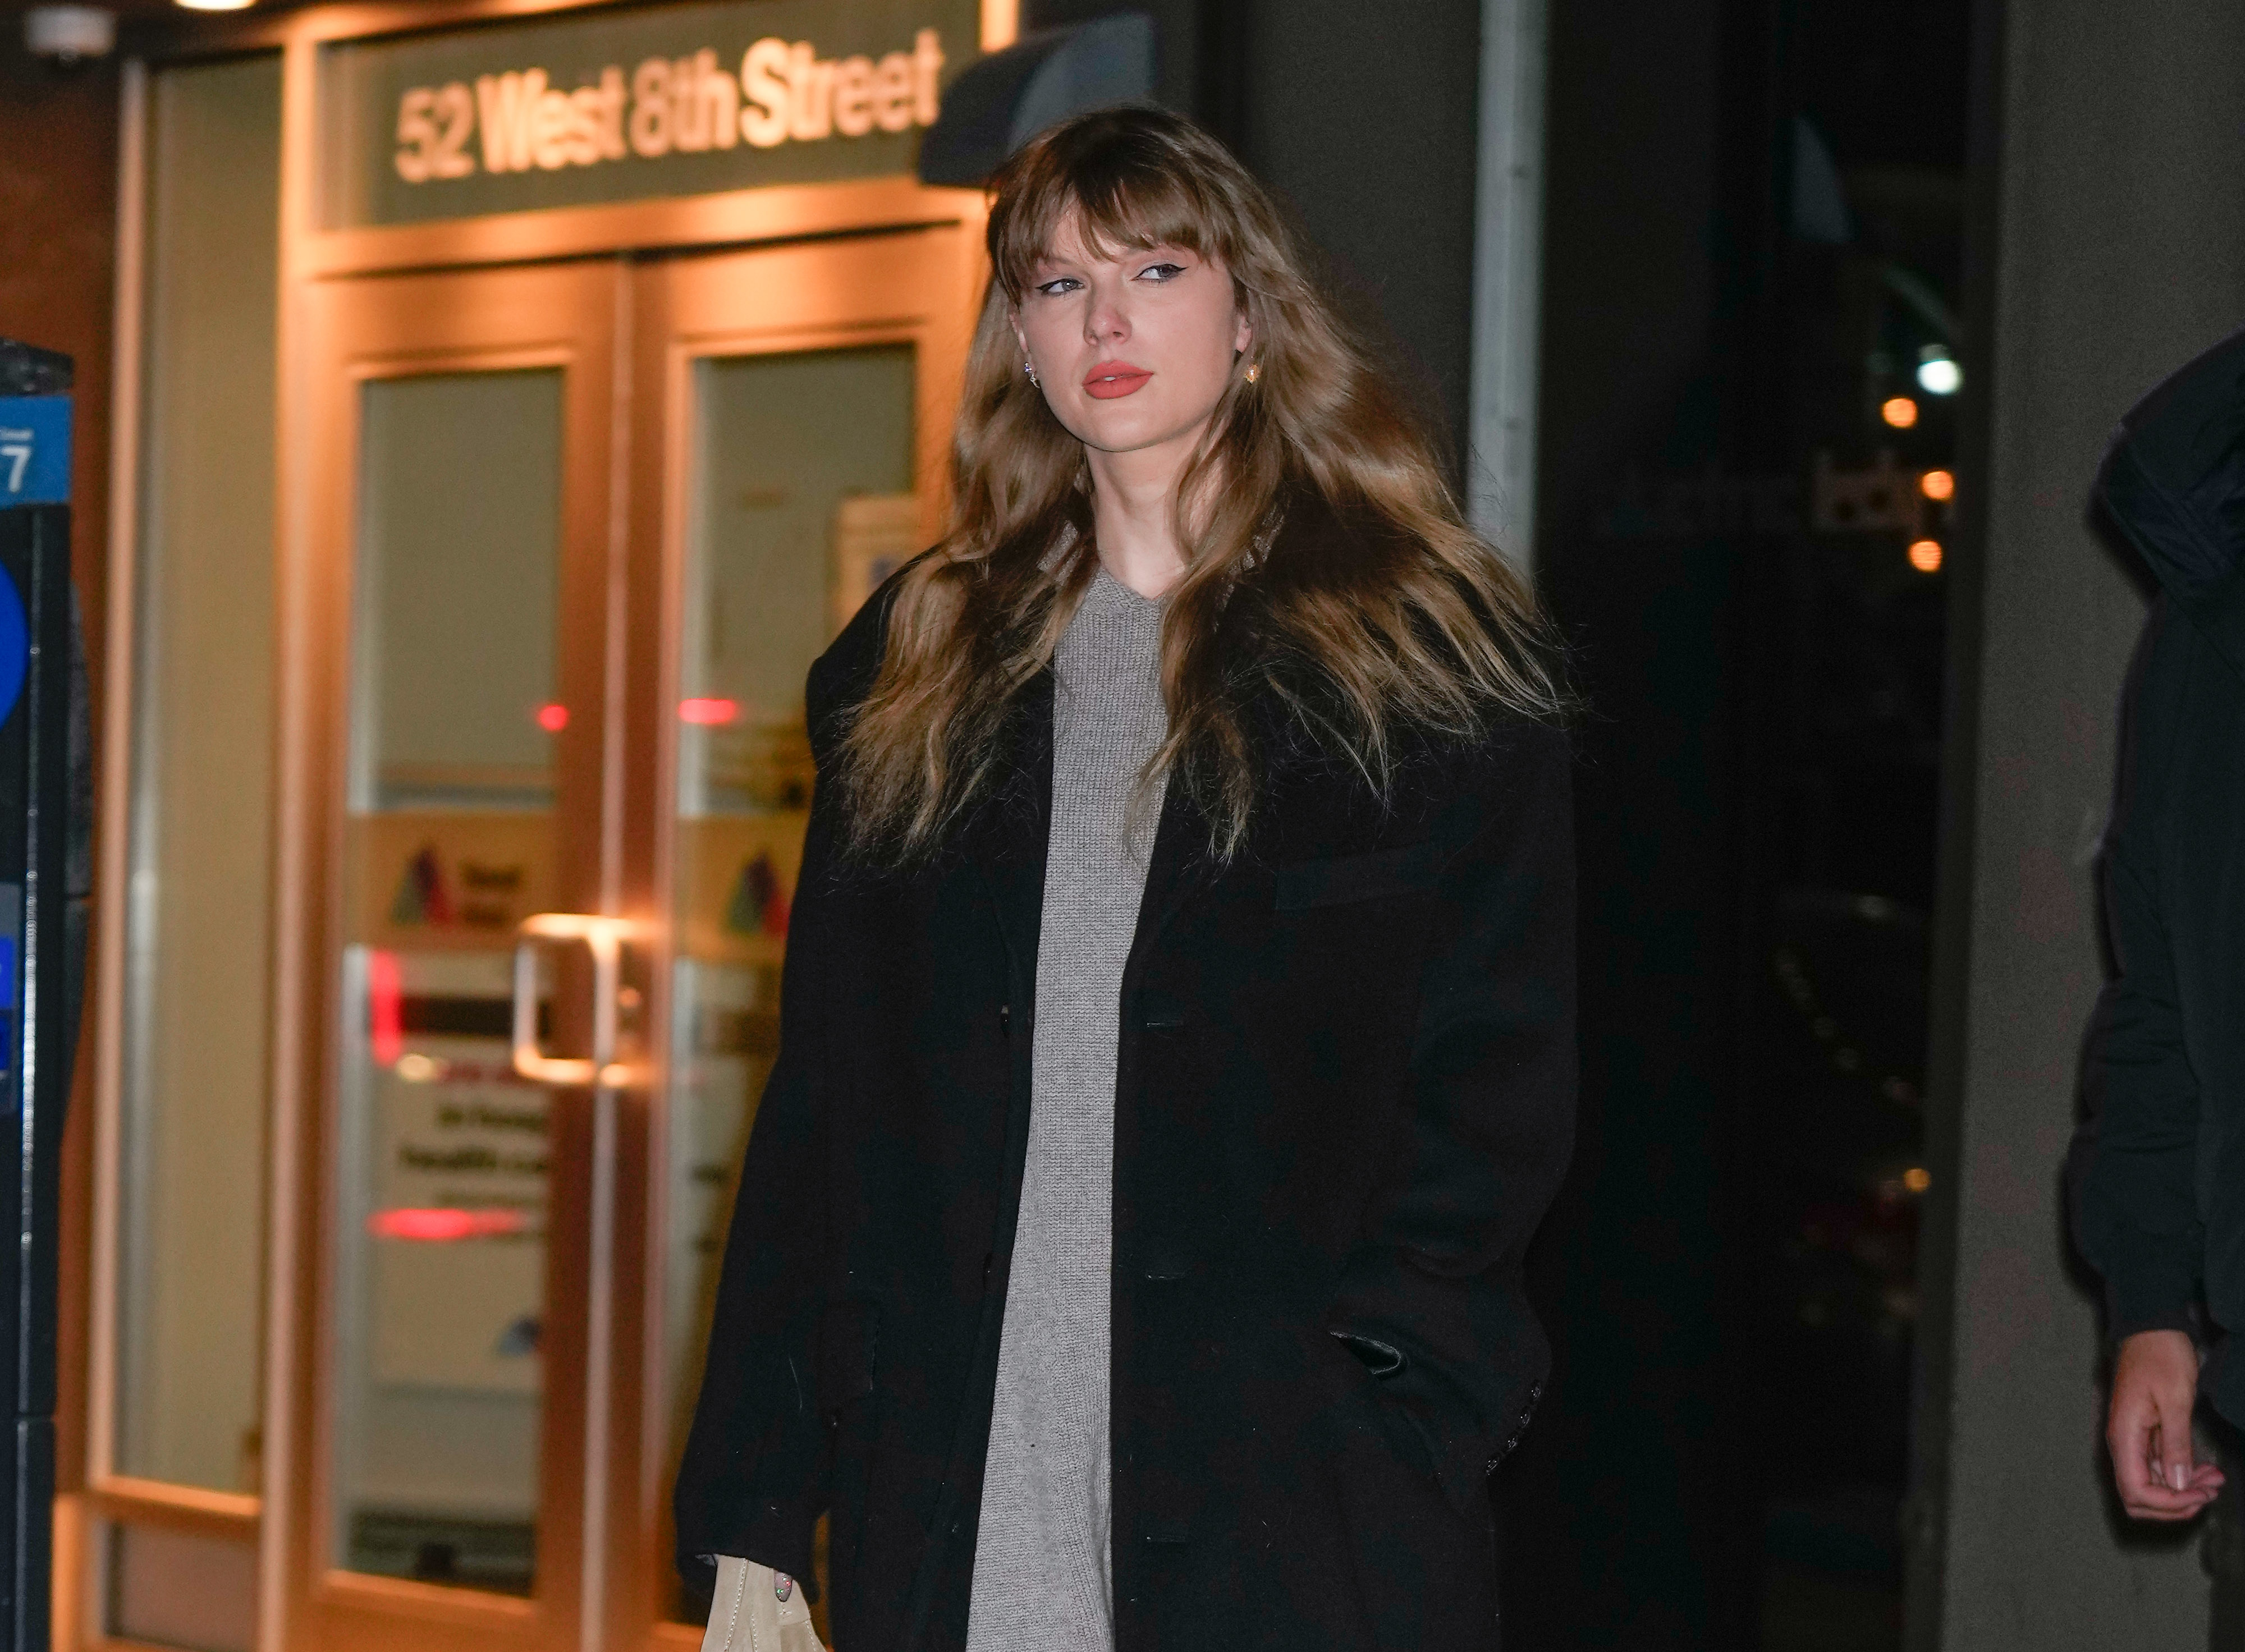 Close-up of Taylor outside a building